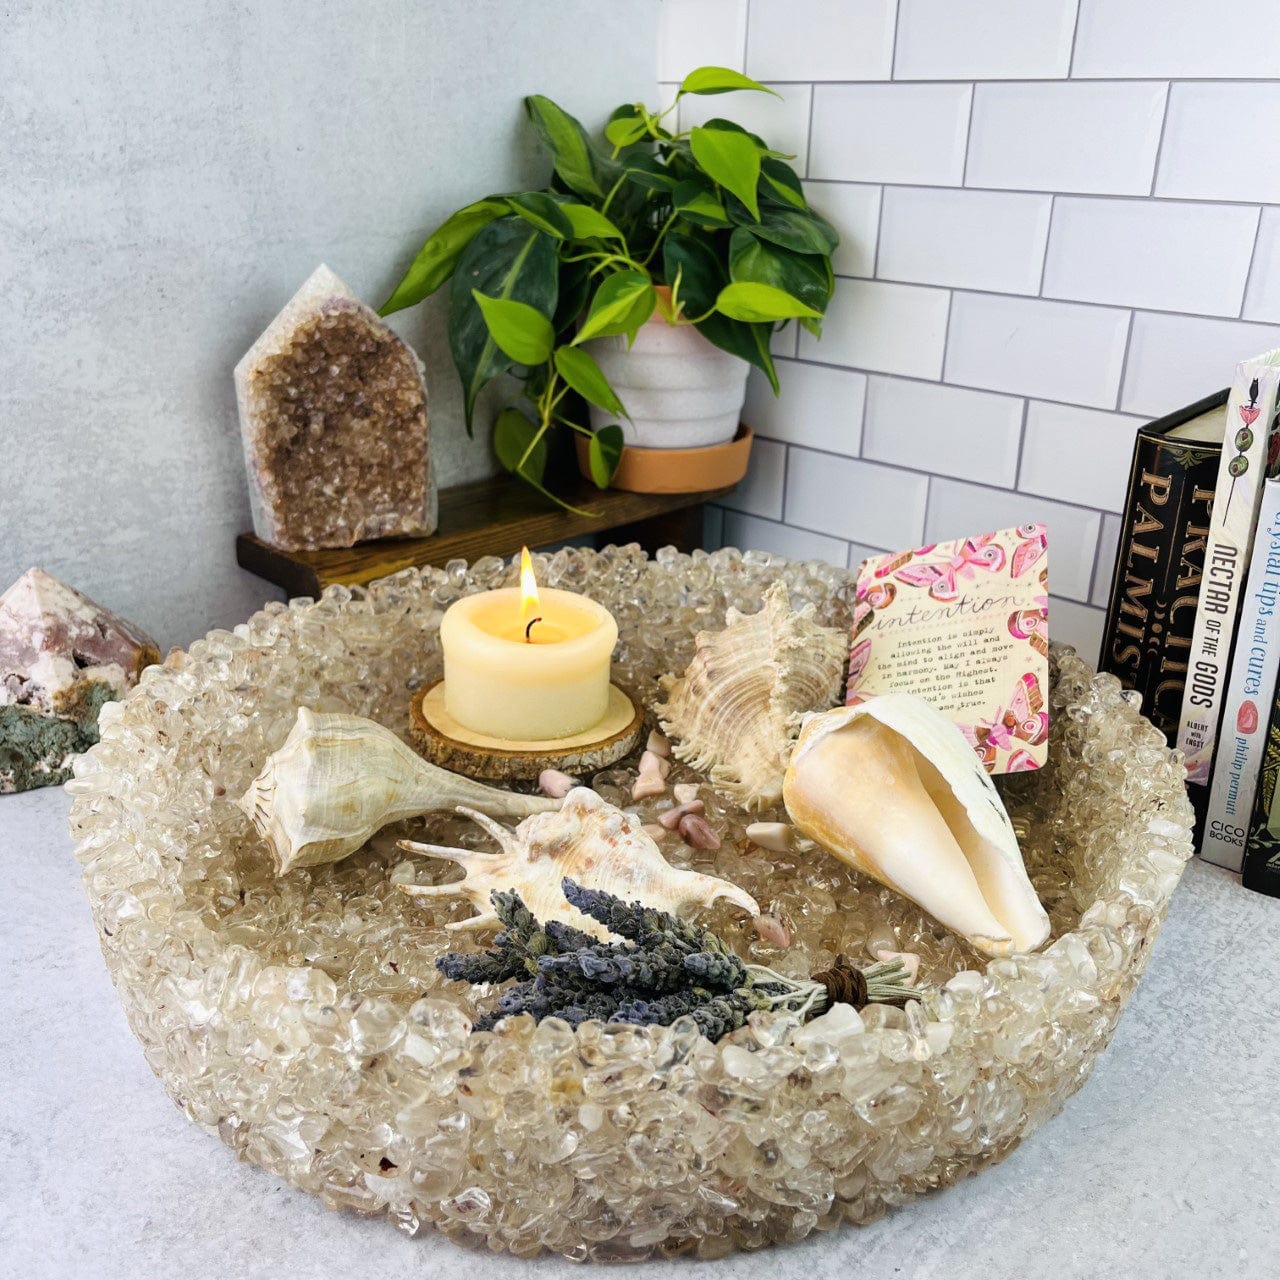 stone bowl with a candle and shells in it